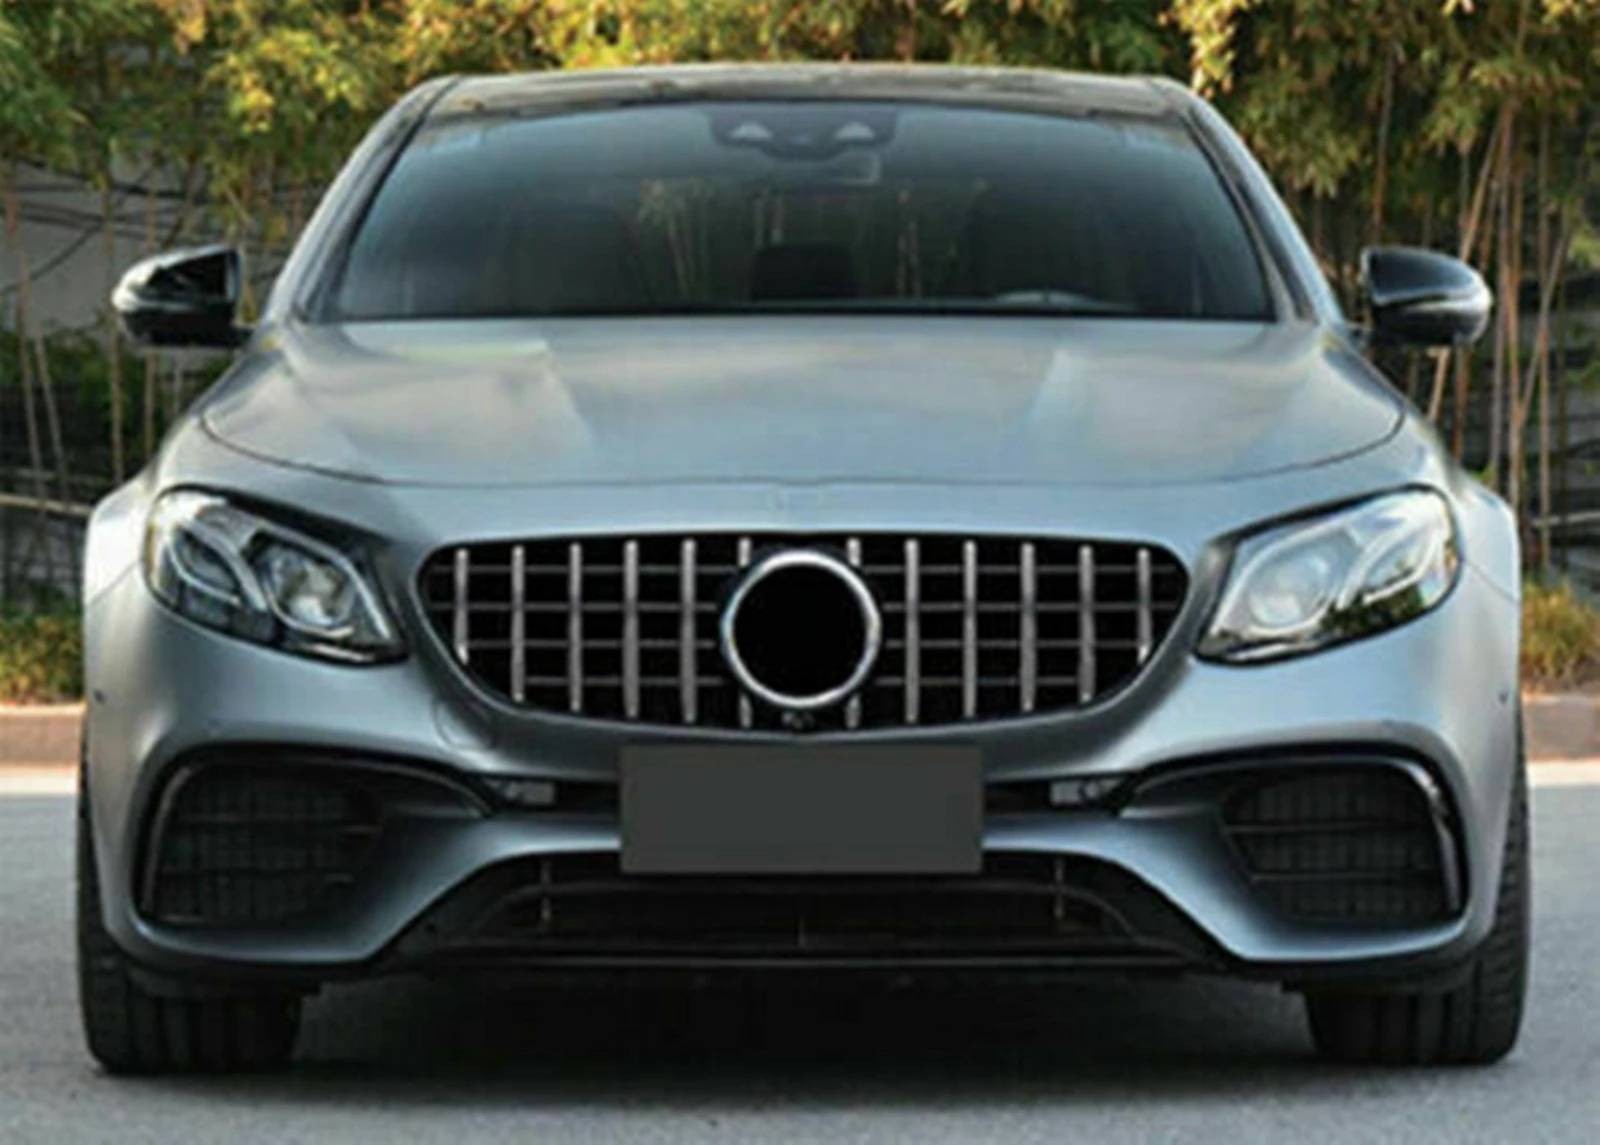 Mercedes W213/S213/C213 E63/E63S Replacement Panamericana Front Grille Replacement. This product is designed to enhance the already fantastic look of your W213 E63 Model by Creating a front Grille that suits your personality. Whether an All Black Front Grille or a more reserved OEM Look Front Grille, we have your E63 model Covered with our Front Grille Selection for Mercedes Benz.